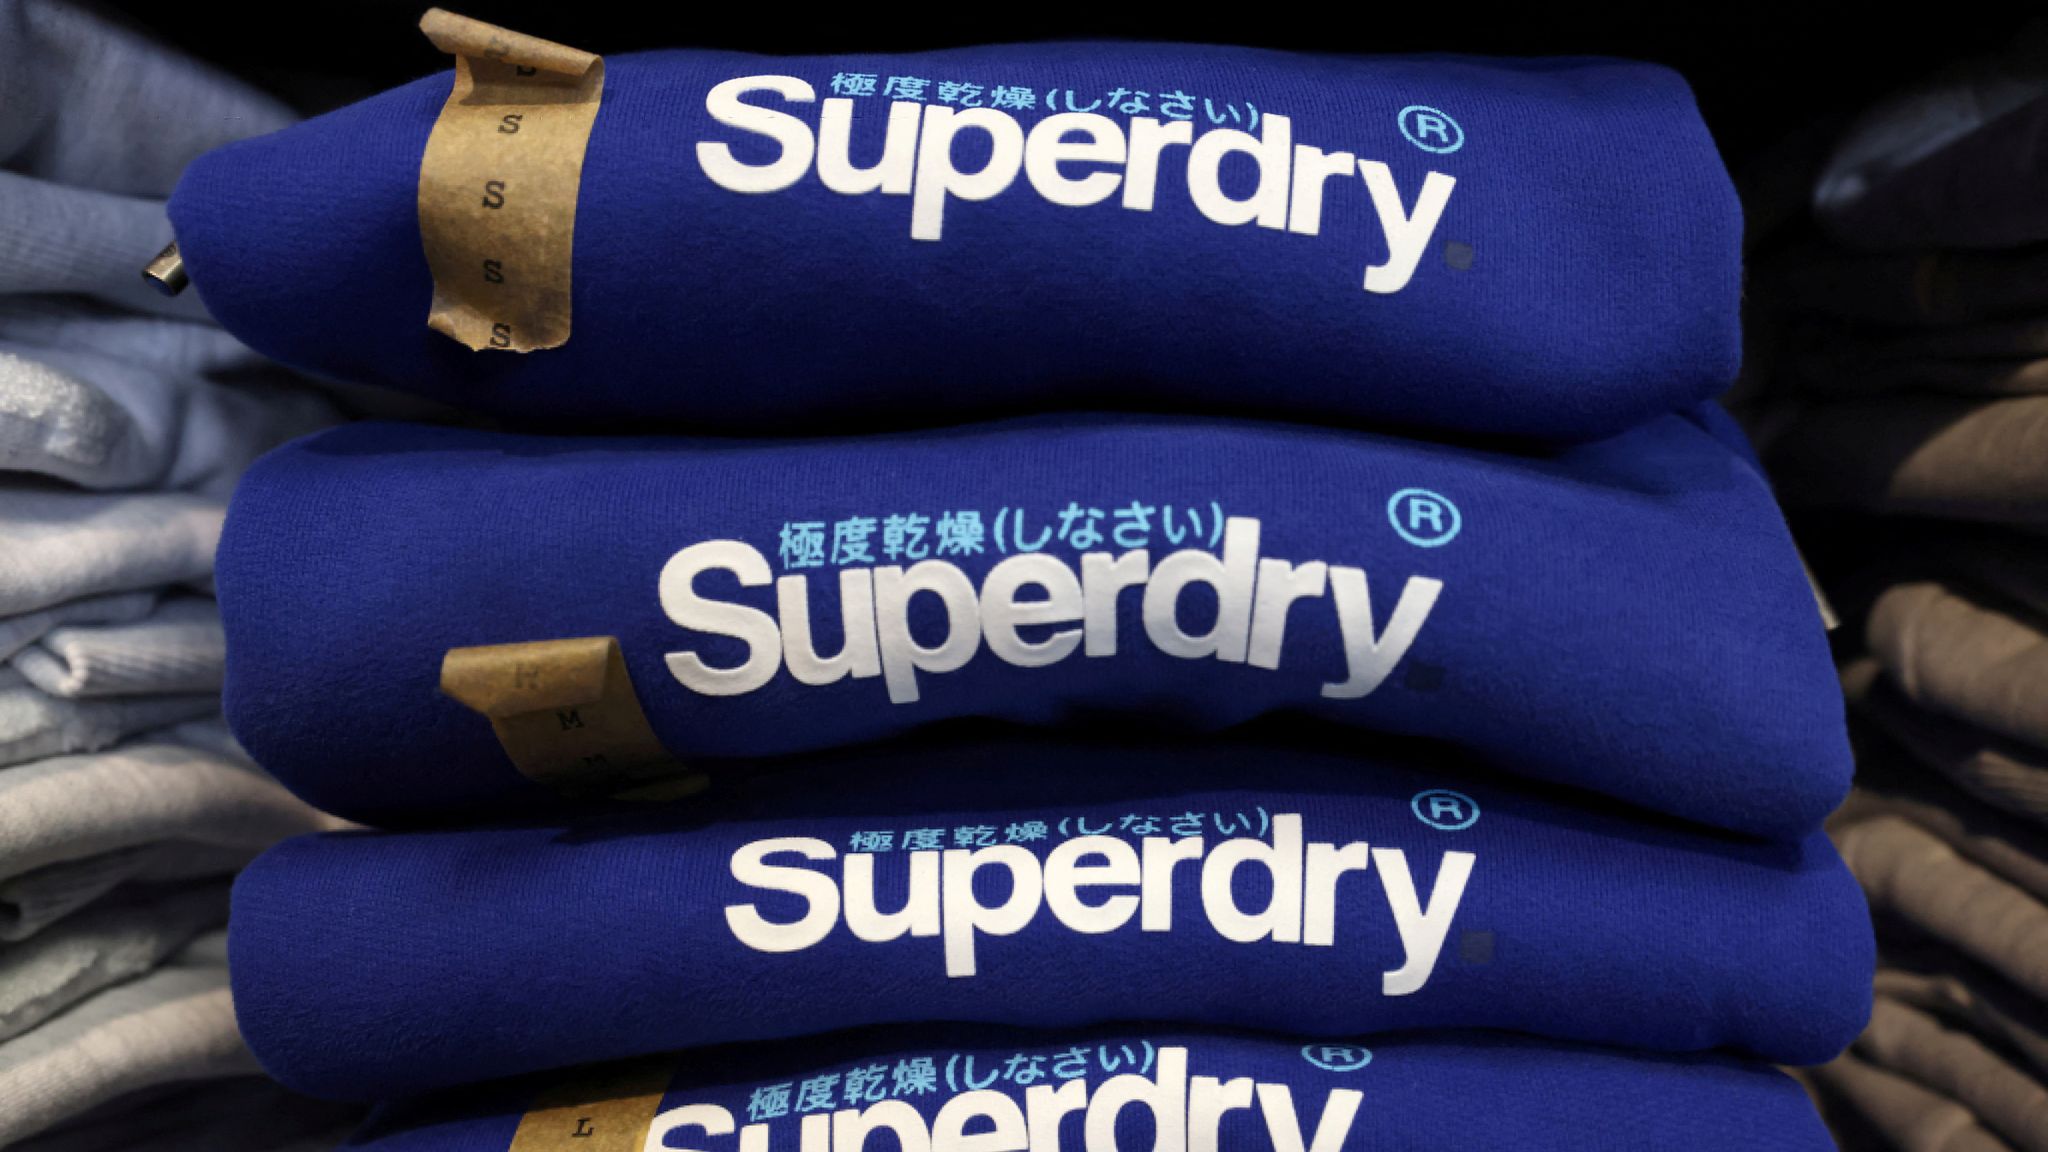 Fears for future of 'super soggy' Superdry as shares slump to record low, Business News